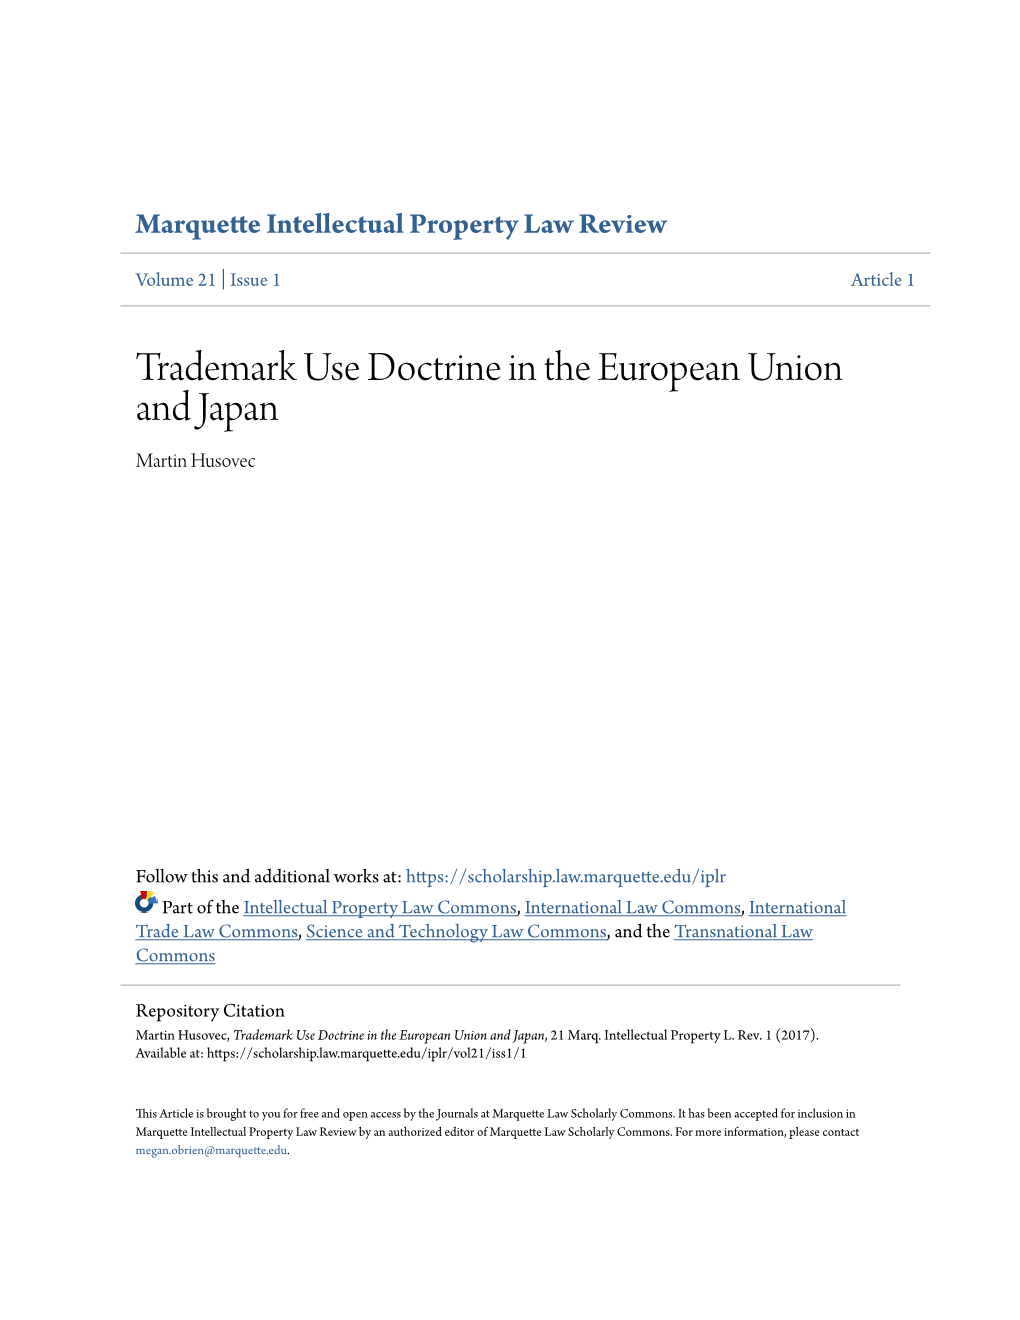 Trademark Use Doctrine in the European Union and Japan Martin Husovec